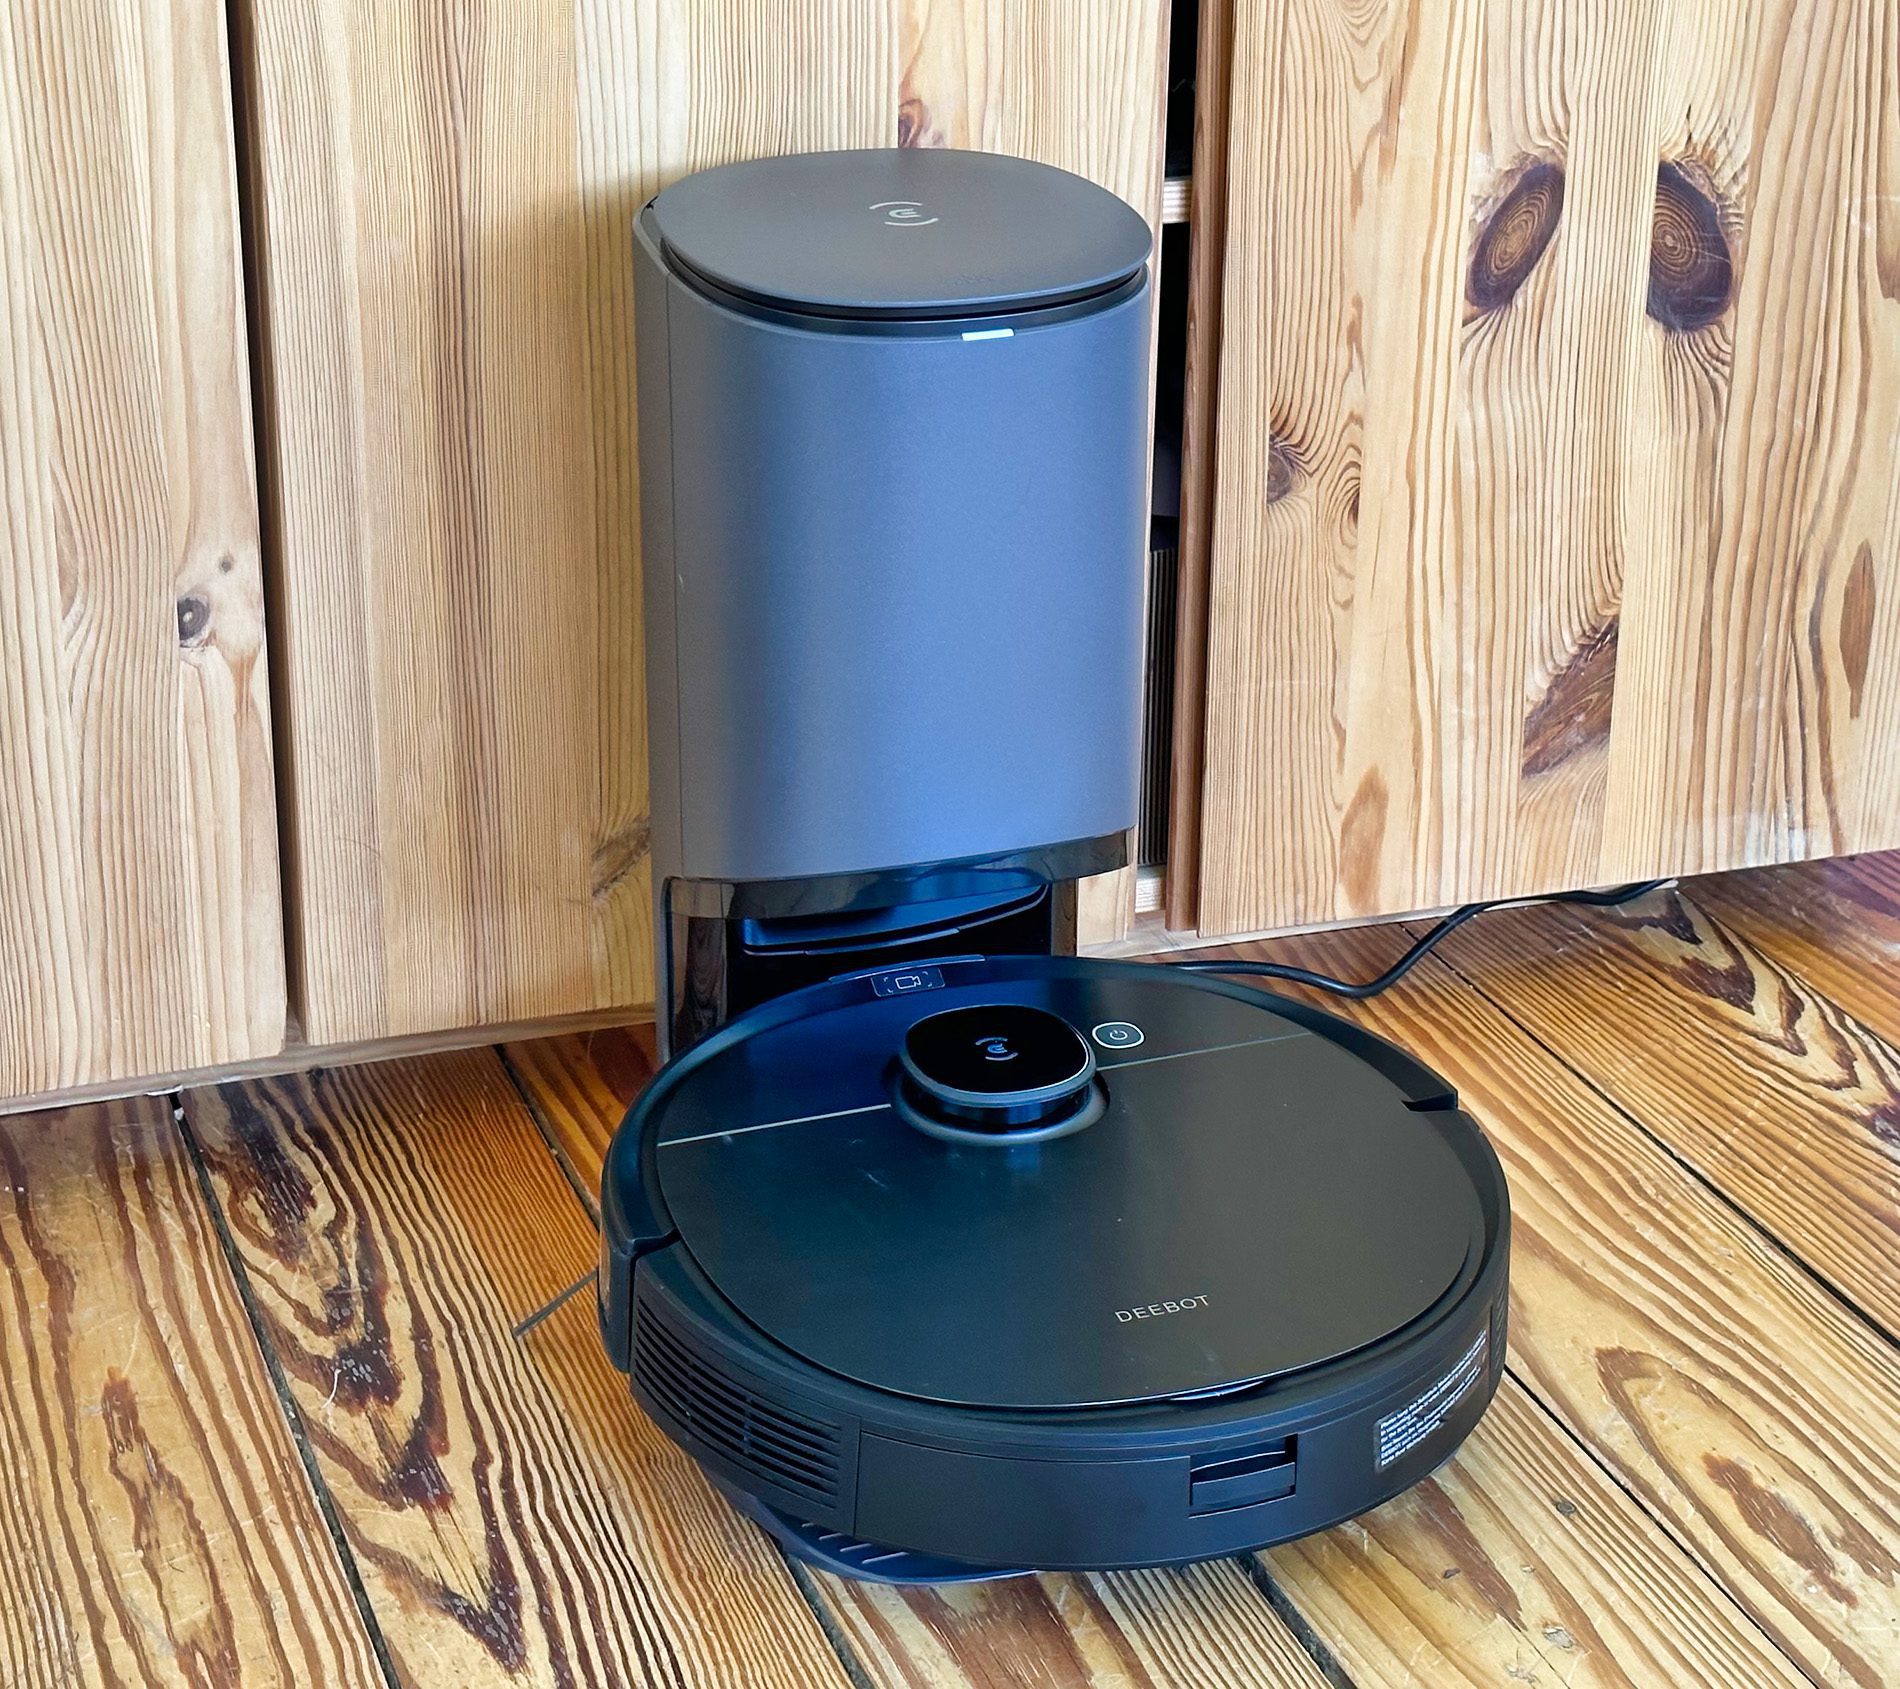 Here you can see the Ecovacs T9 AIVI with the optional dock.